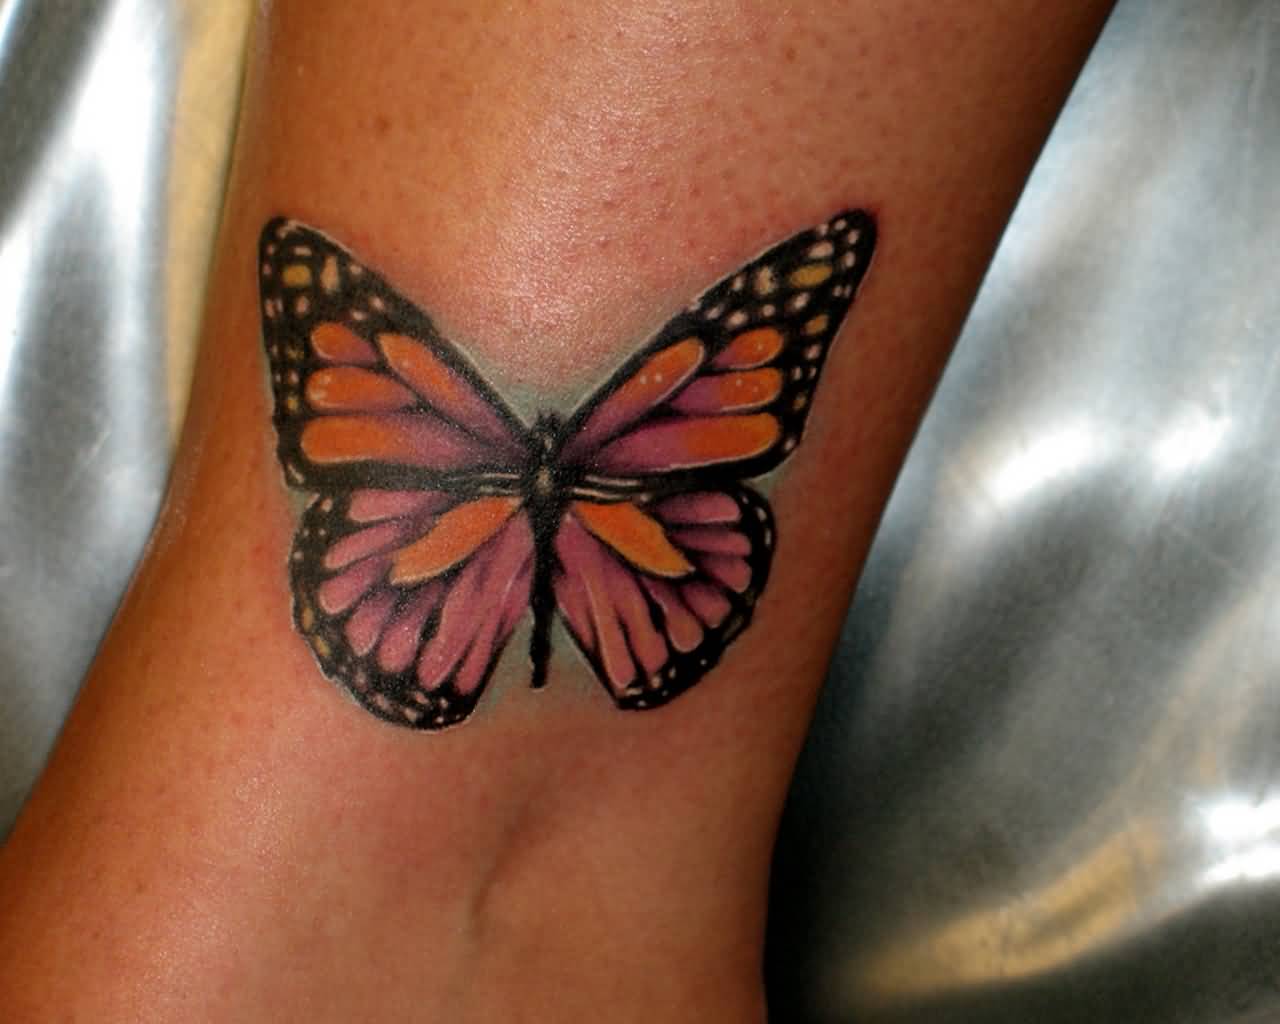 Gorgeous Butterfly Tattoo On Ankle